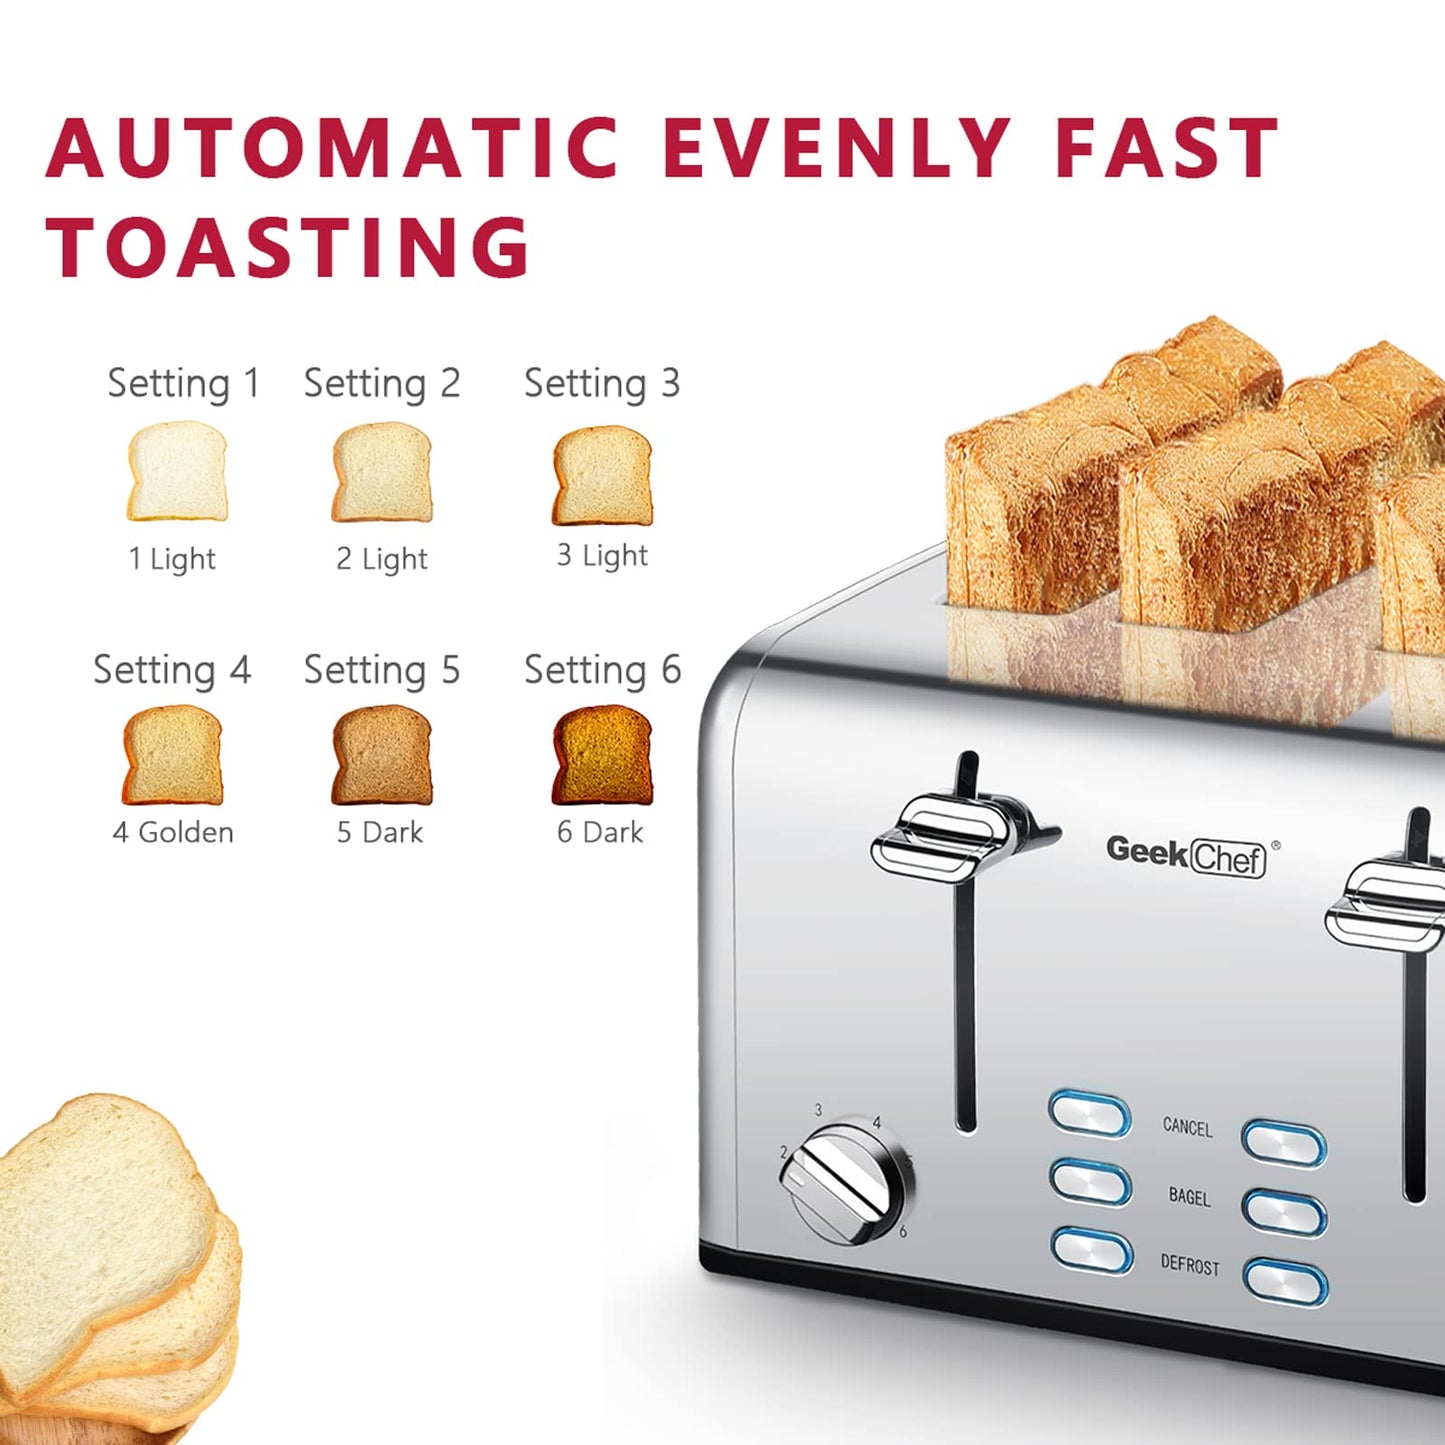 Toaster 4 Slice, Geek Chef Stainless Steel Toaster with Extra Wide Slots, 4 Slot Toaster with Bagel/Defrost/Cancel Function, Dual Control Panel of 6 Toasting Bread Shade Settings